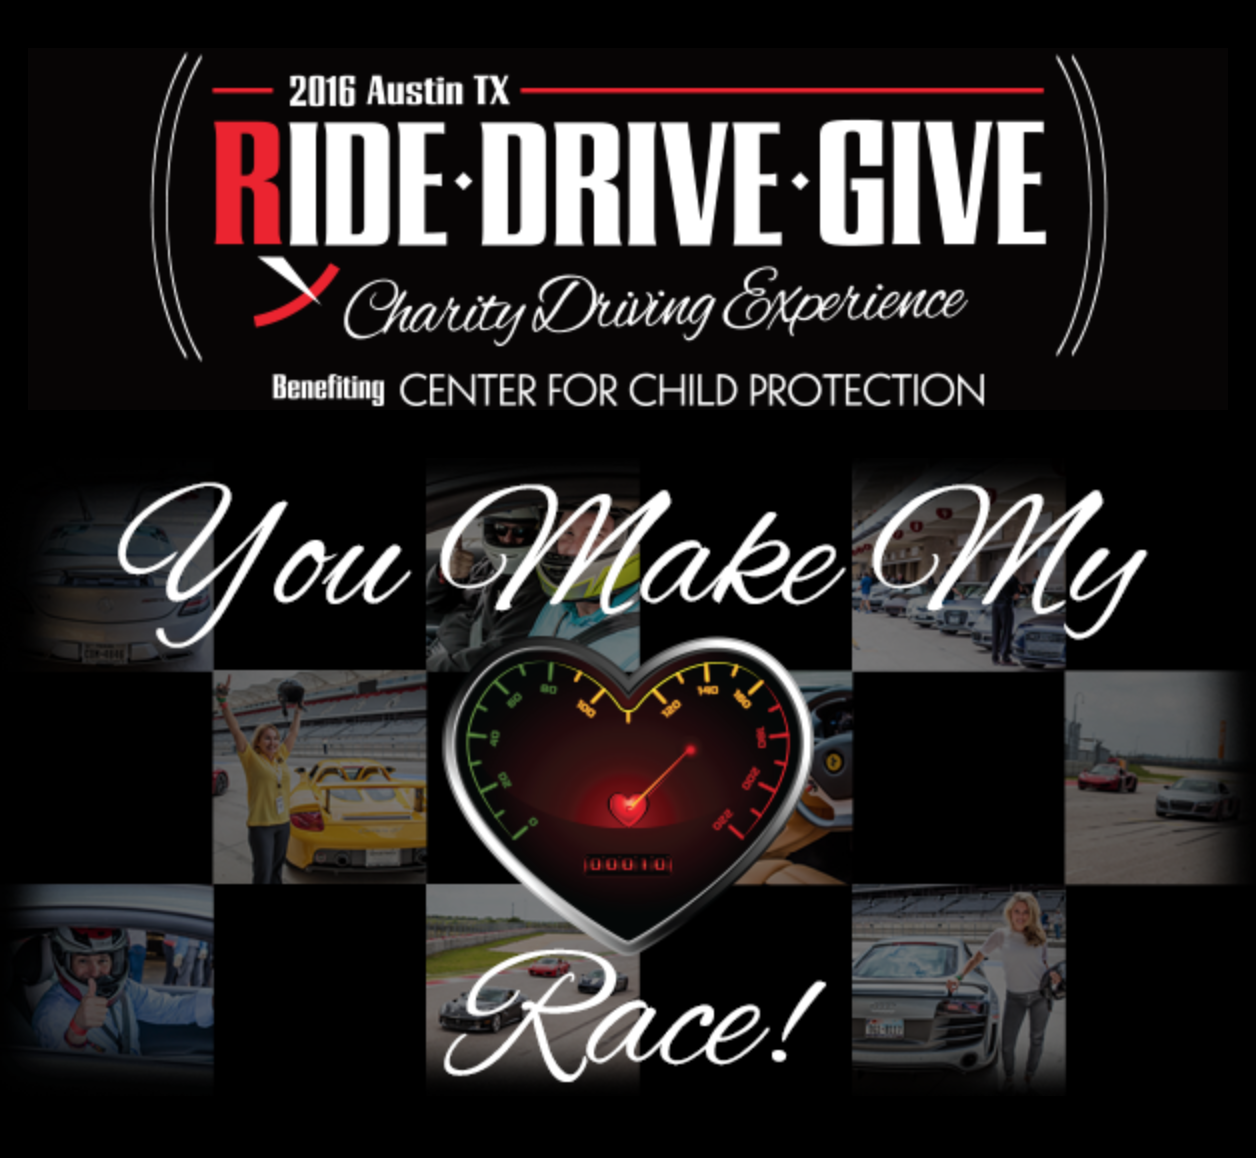 Ride.Drive.Give